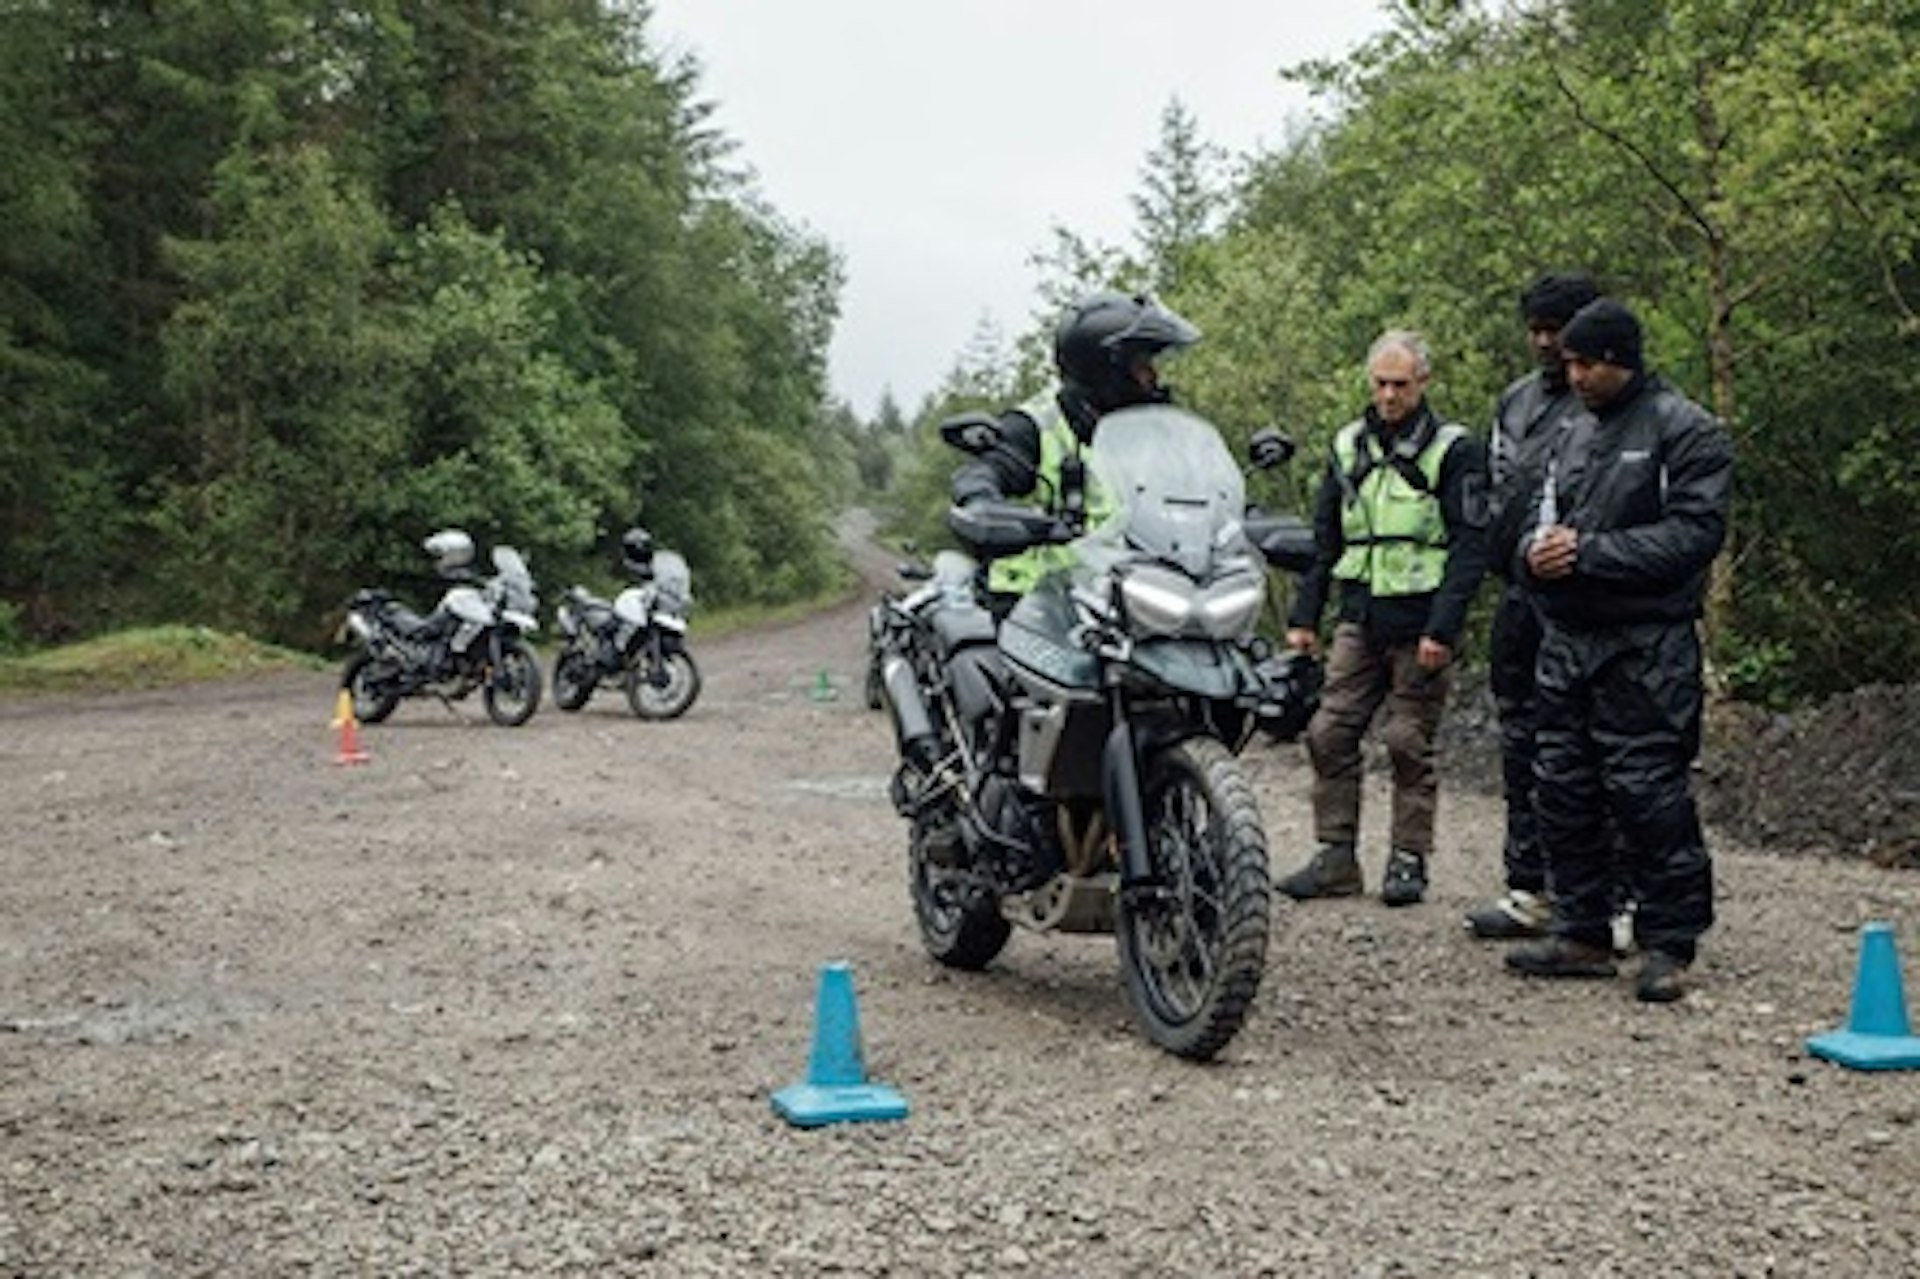 Half Day Off-Road Motorcycle Training at Triumph Adventure 2